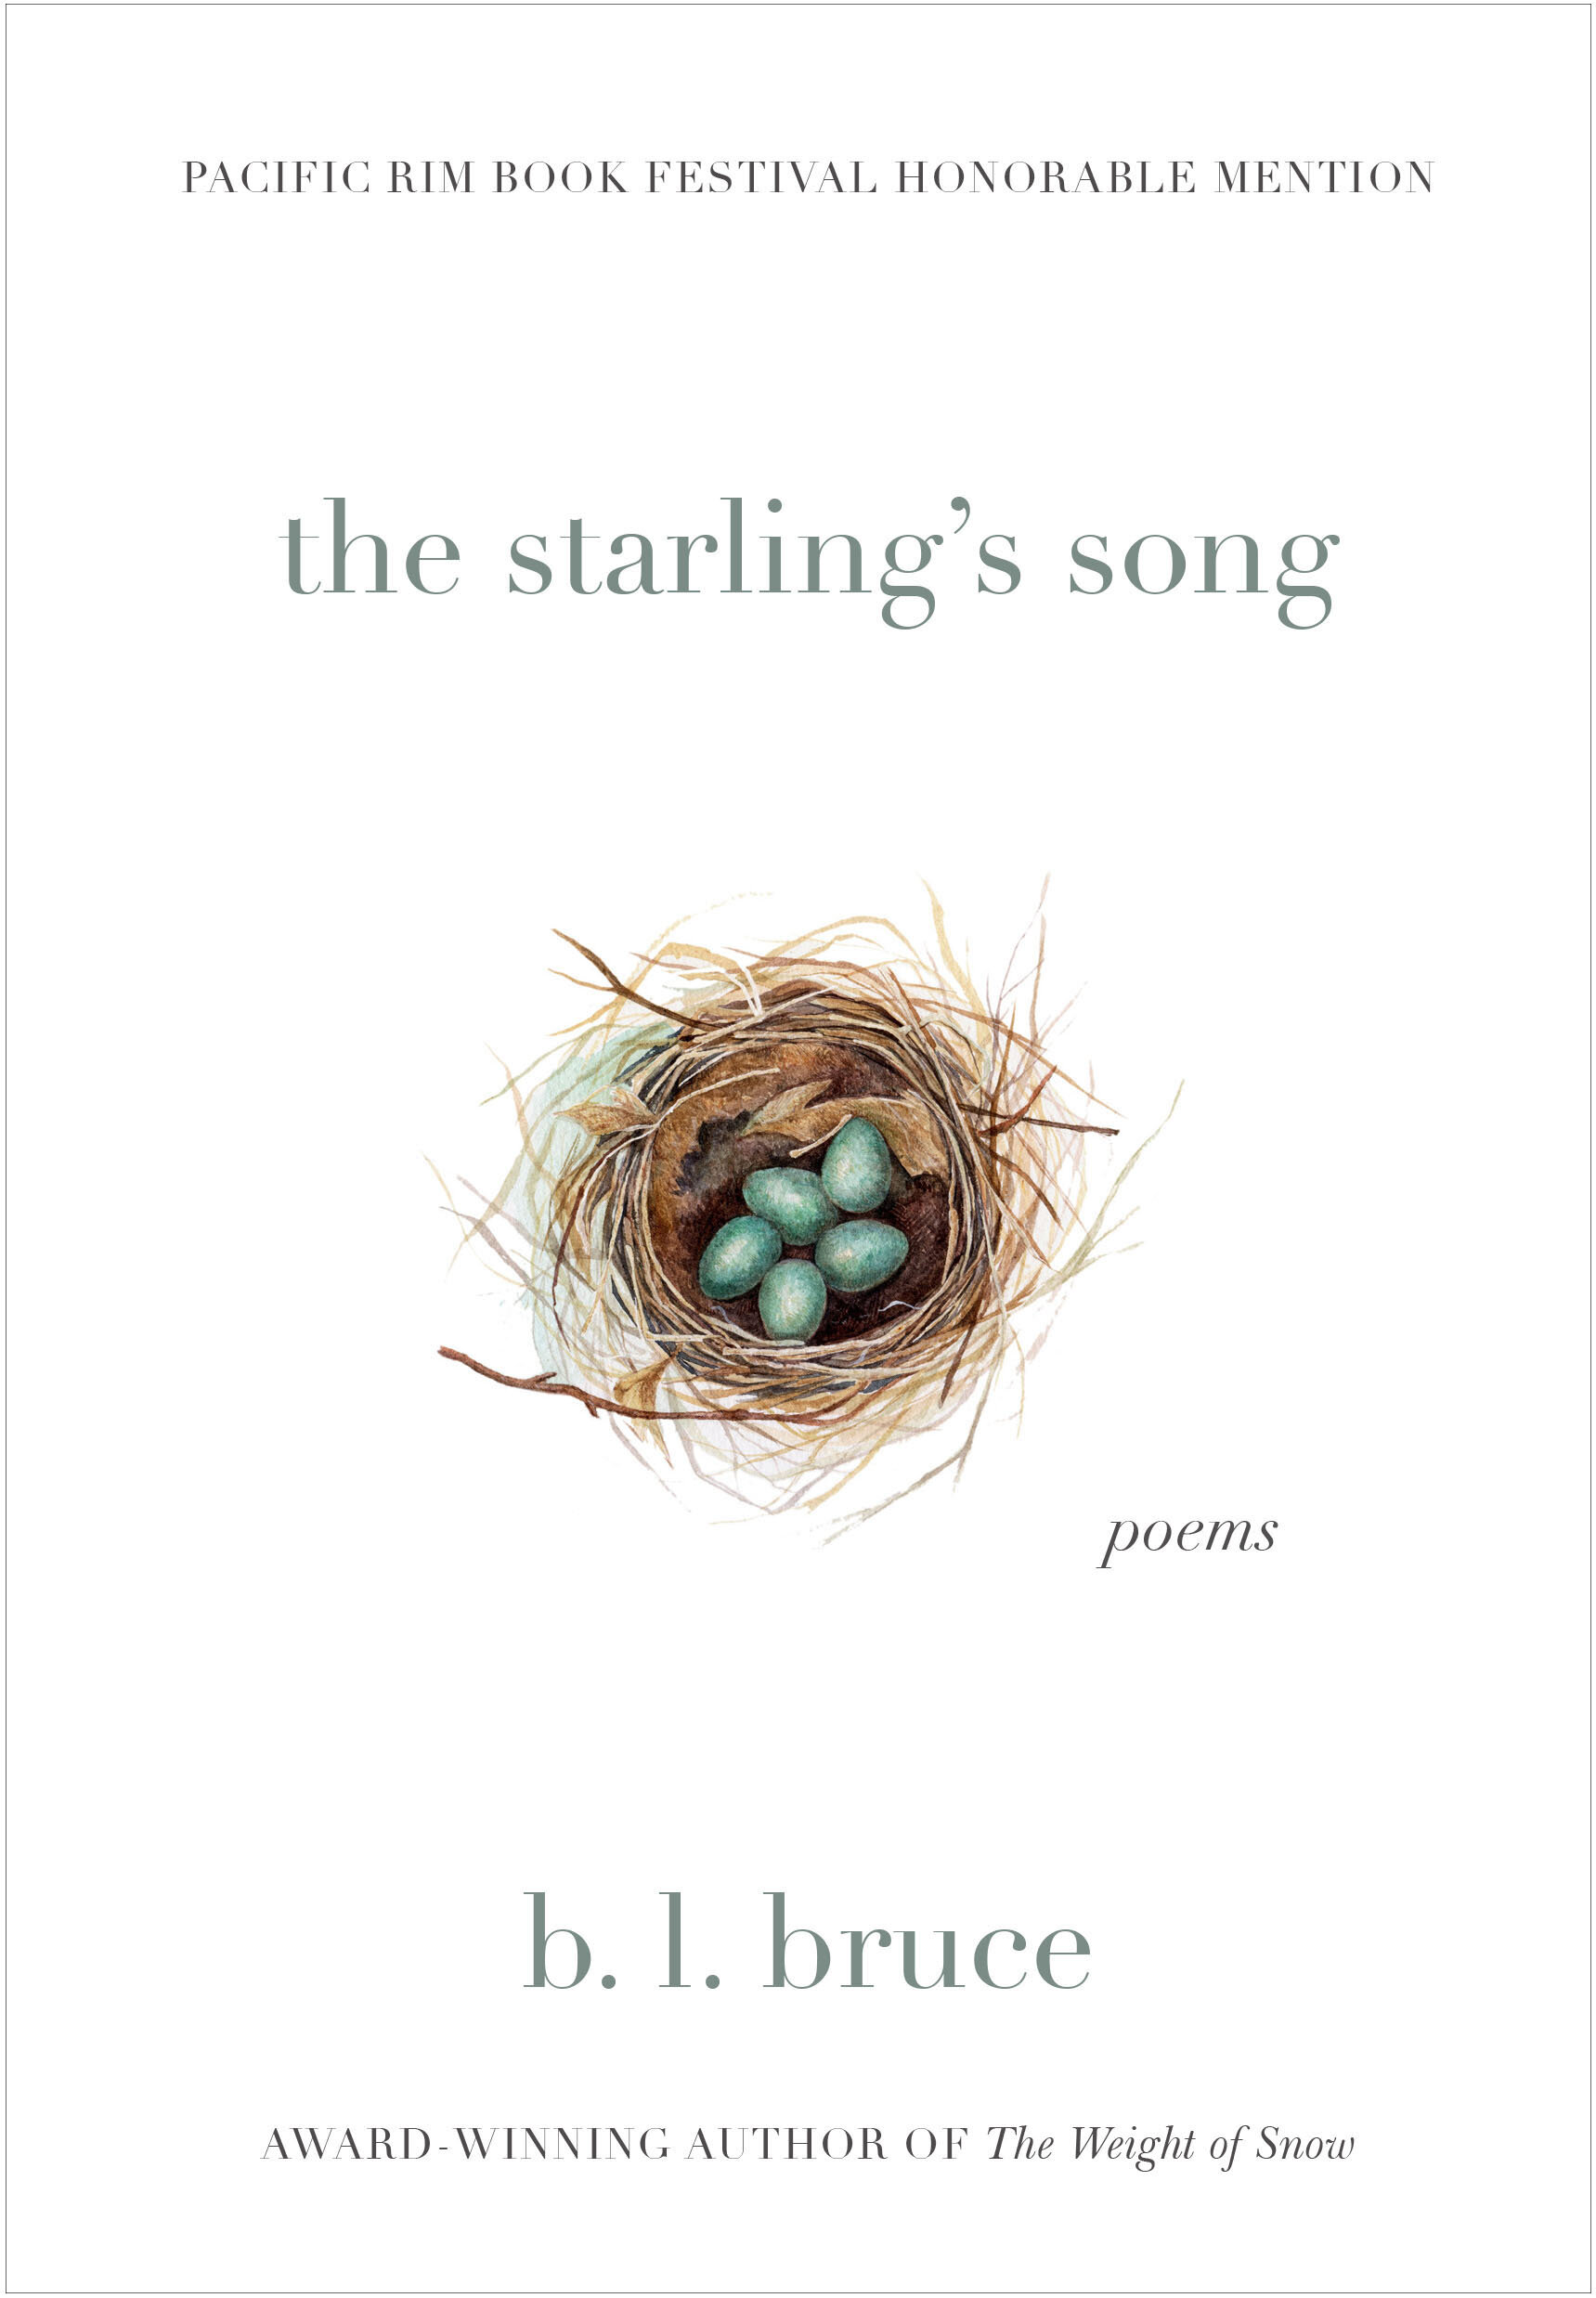 THE STARLING'S SONG